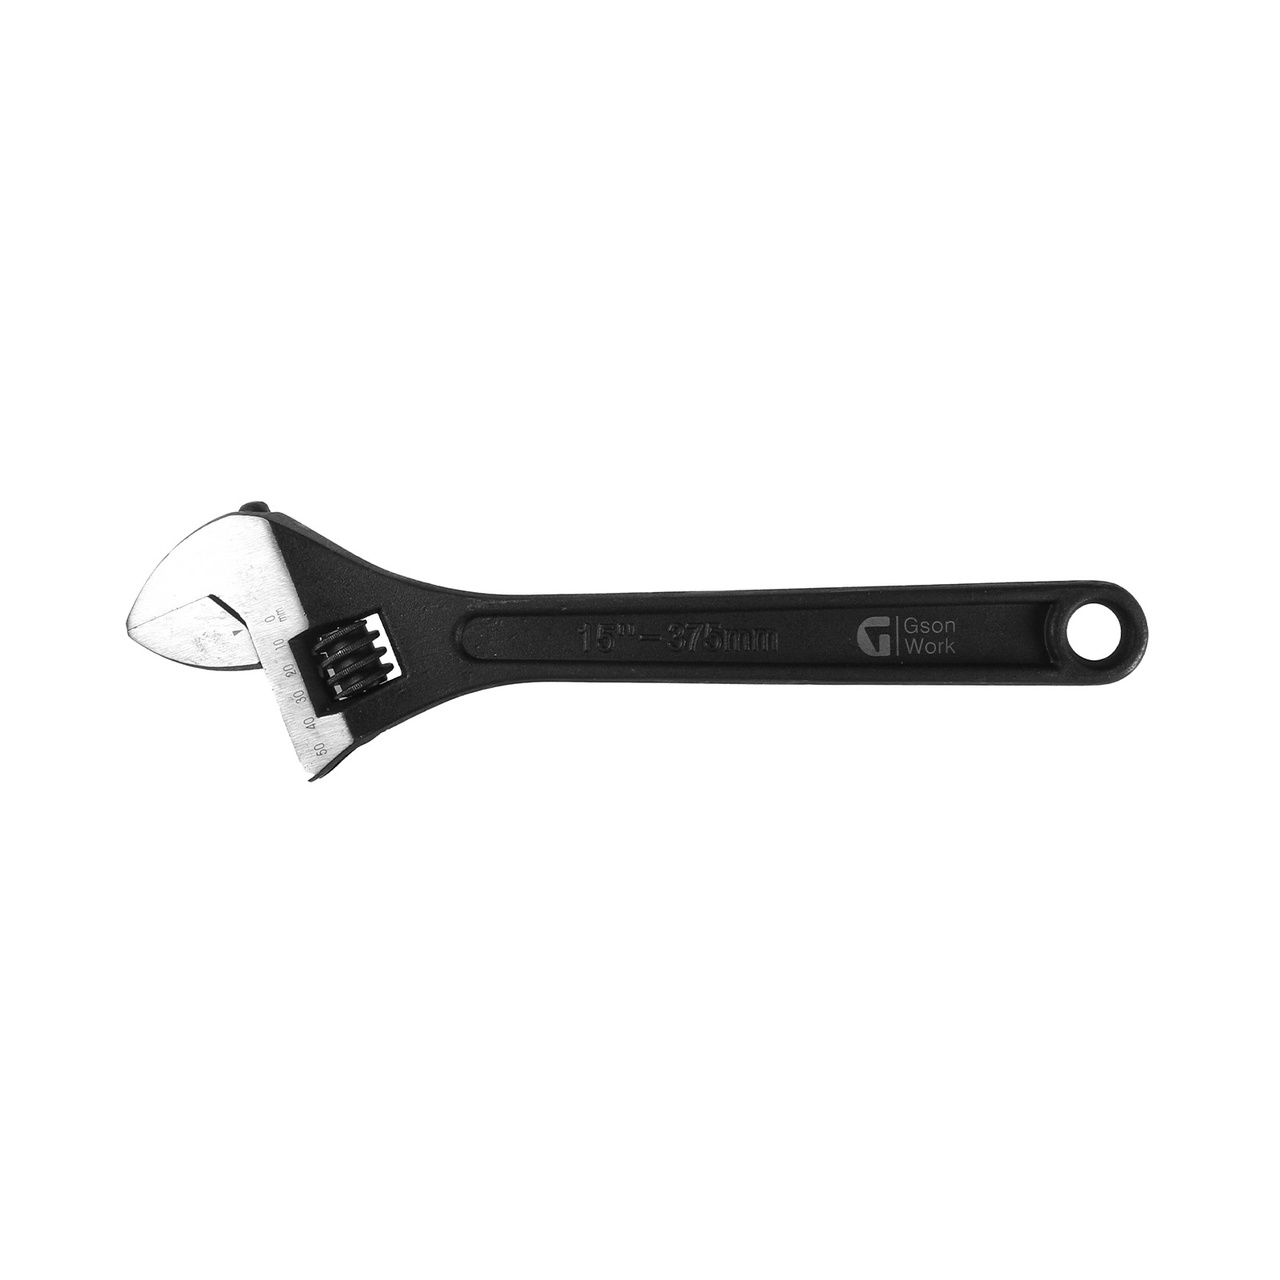 Adjustable Wrench 15" / 375 mm